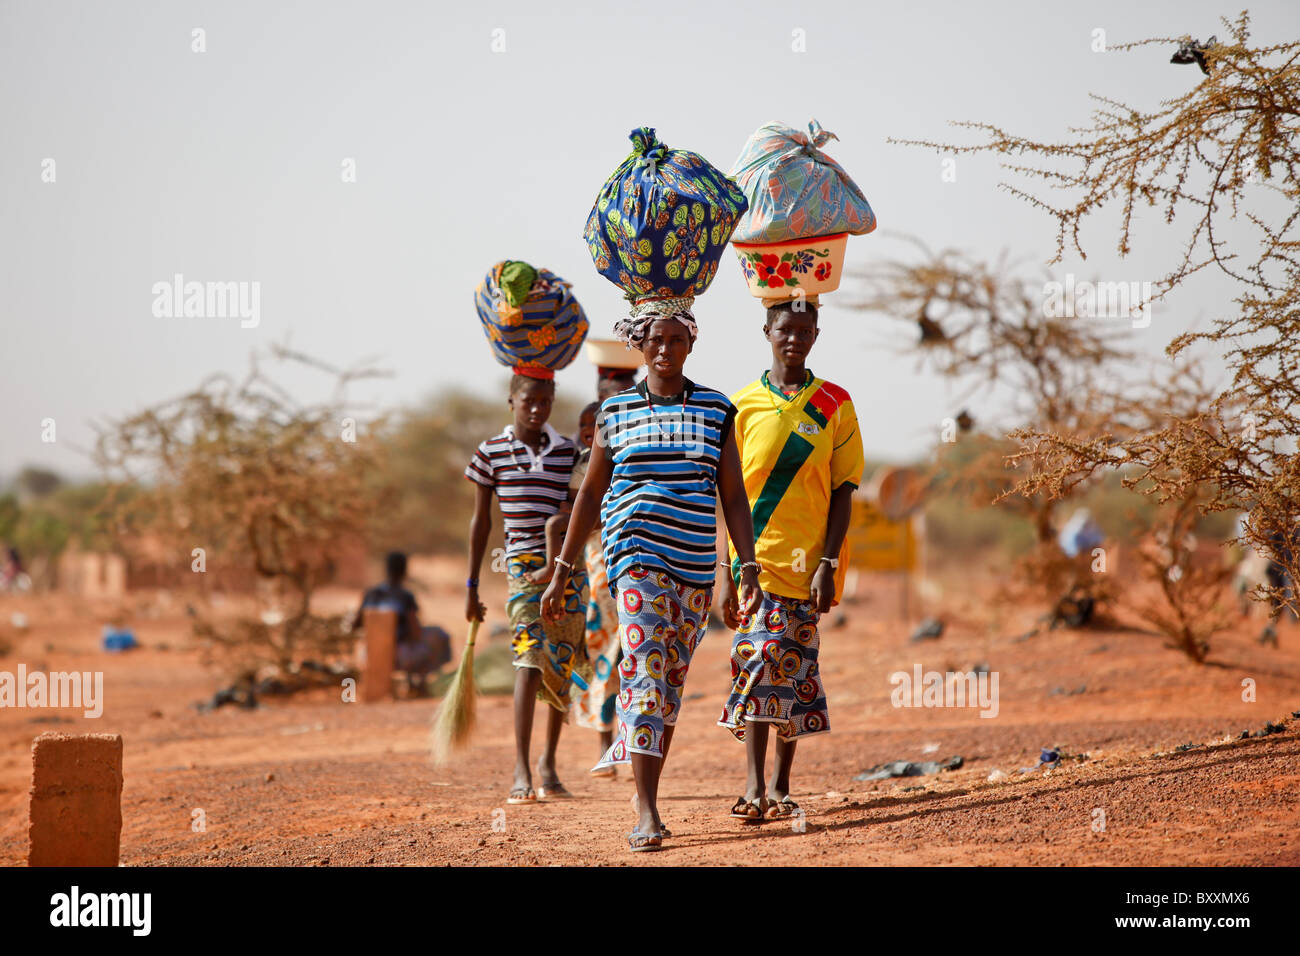 Women arrive in the town of Djibo, Burkina Faso on foot, carrying their wares on their heads in traditional African fashion. Stock Photo